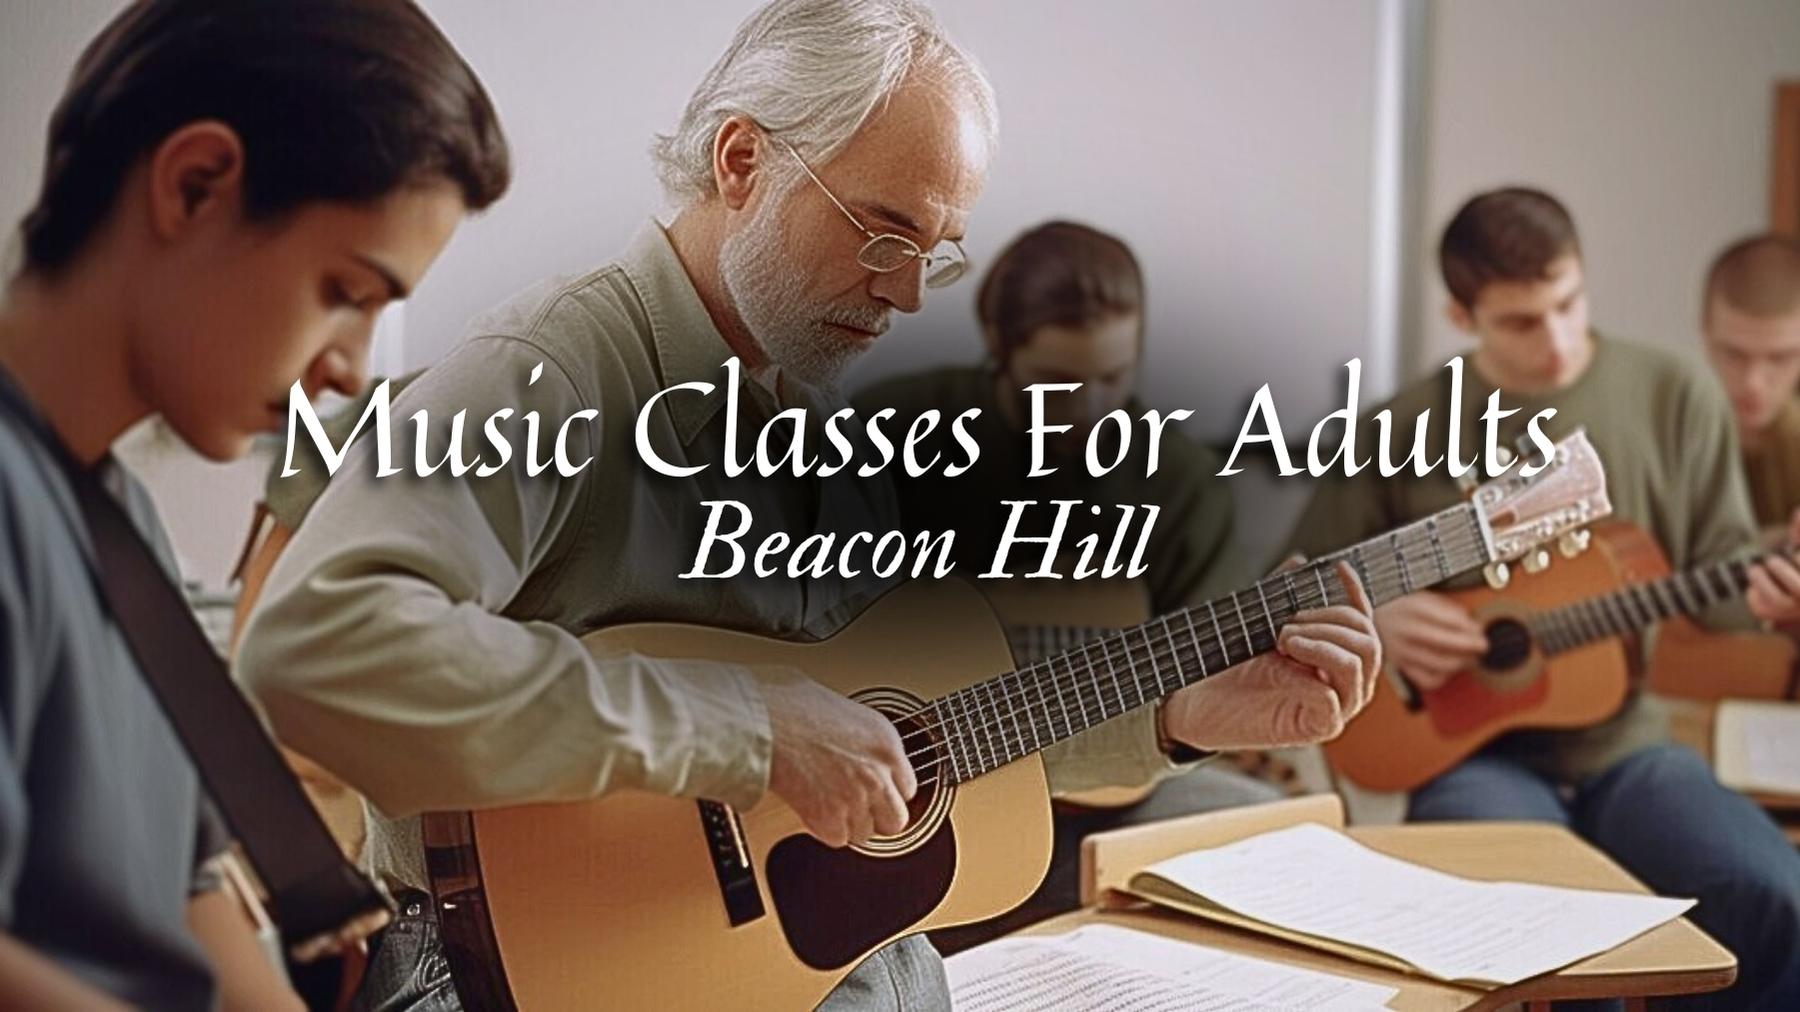 Music Classes for Adults in Beacon Hill, Massachusetts